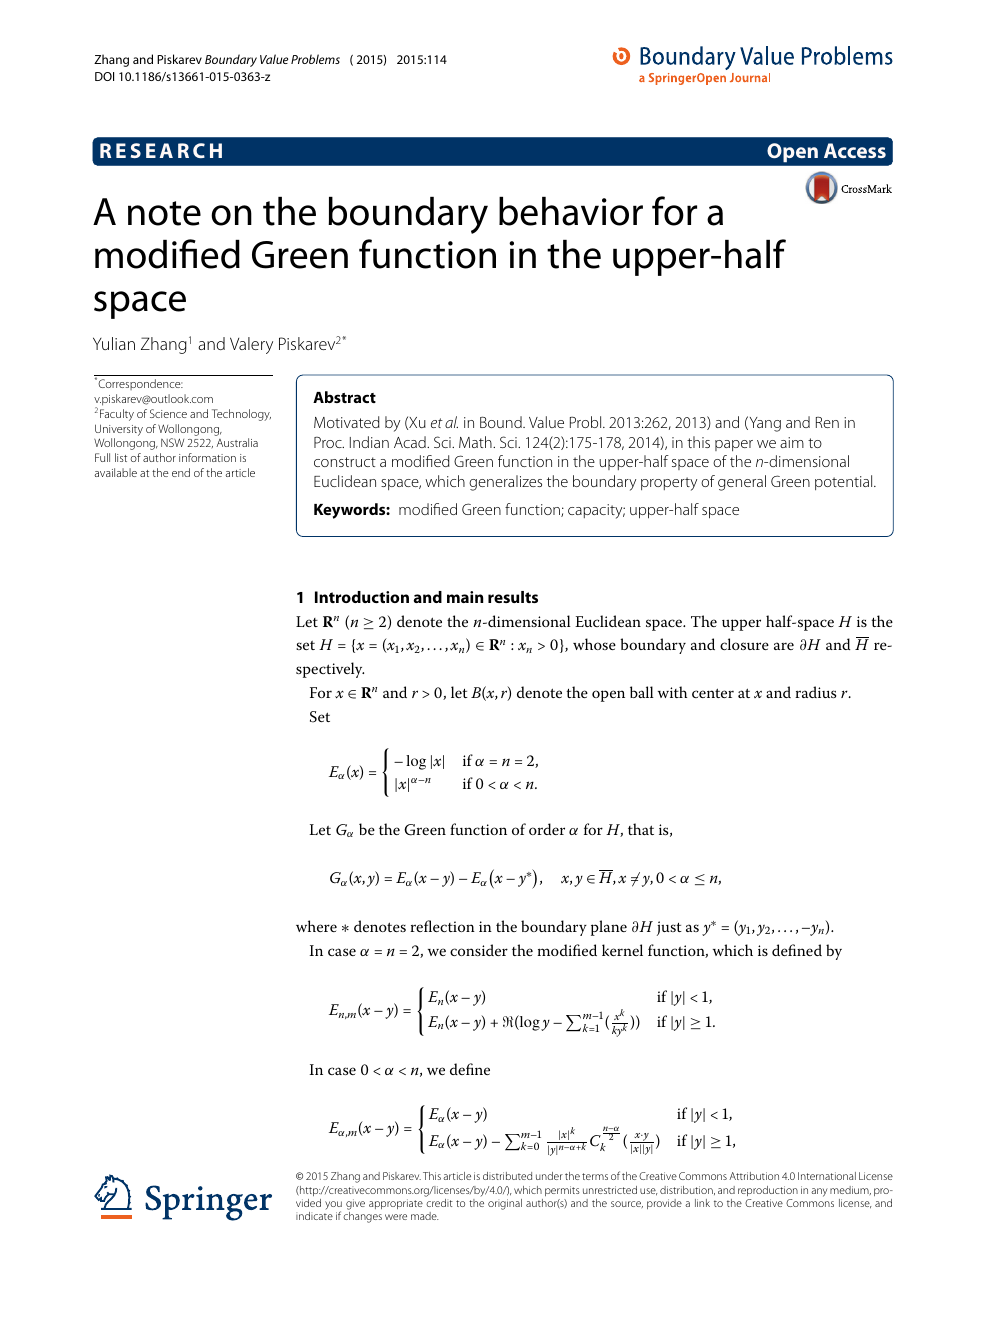 A Note On The Boundary Behavior For A Modified Green Function In The Upper Half Space Topic Of Research Paper In Mathematics Download Scholarly Article Pdf And Read For Free On Cyberleninka